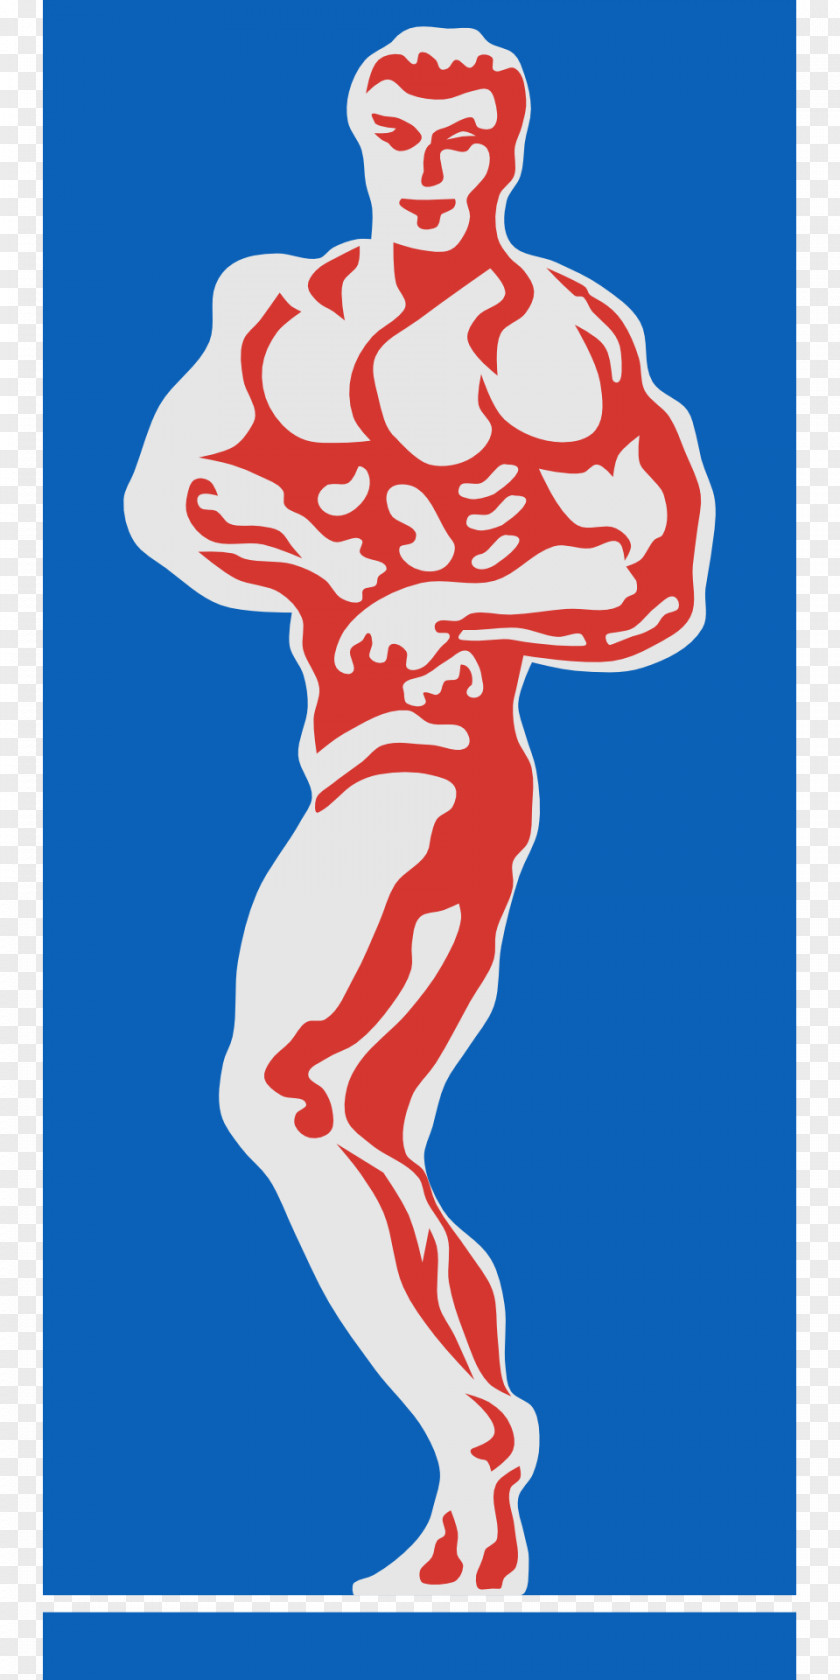 Bodybuilding IPhone 6 8 5s SE PNG